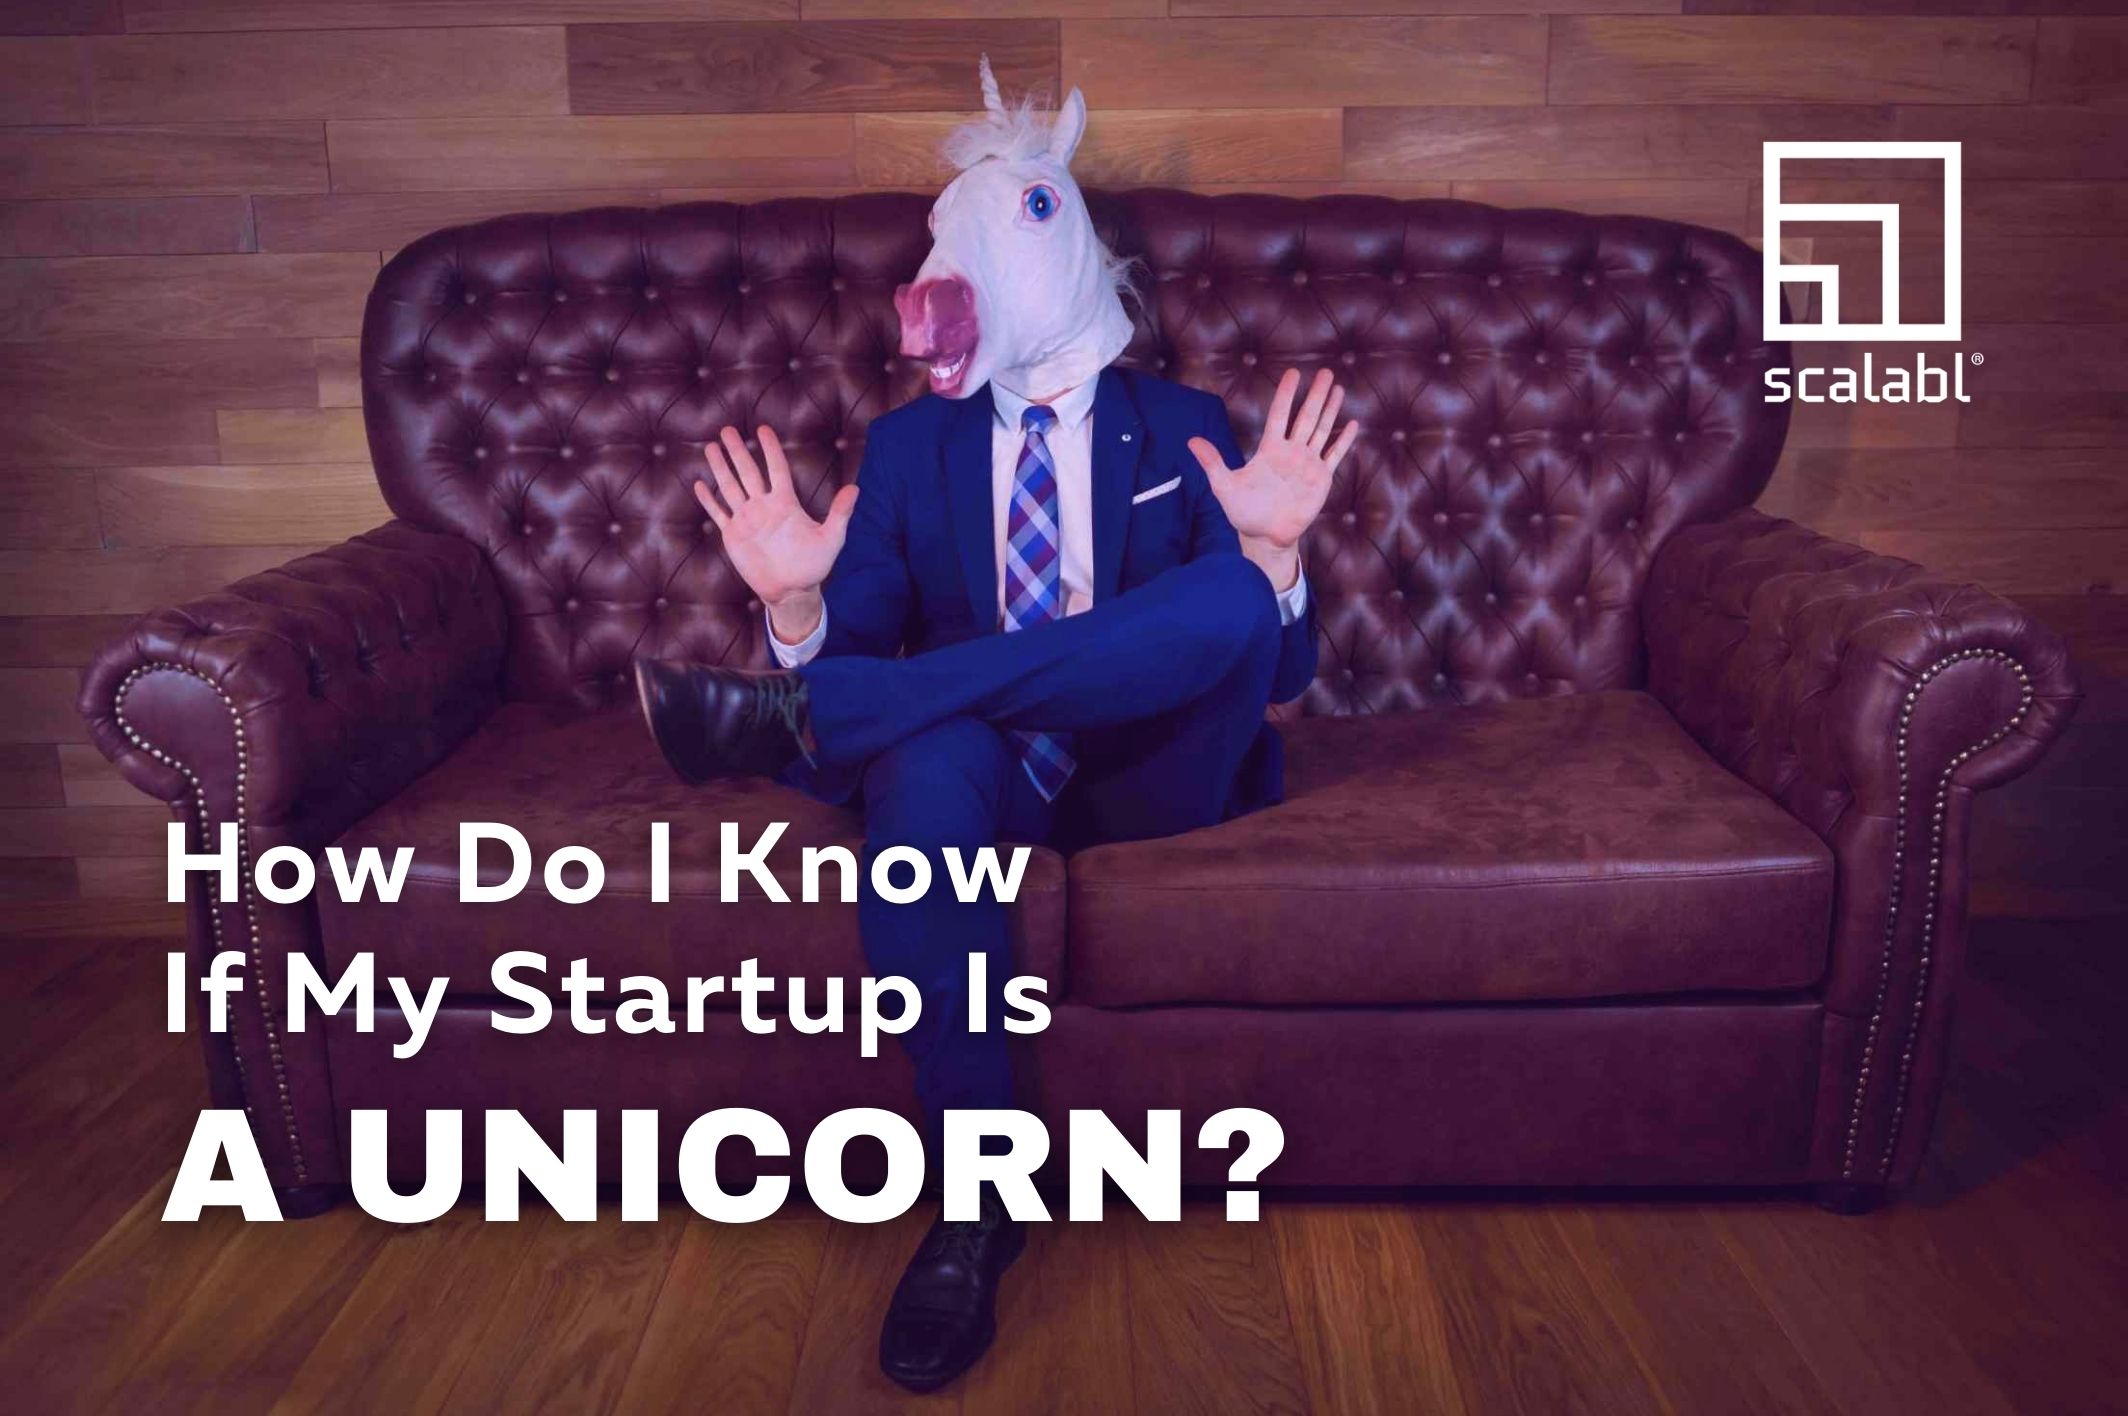 How Do I Know if My Startup Is a Unicorn?